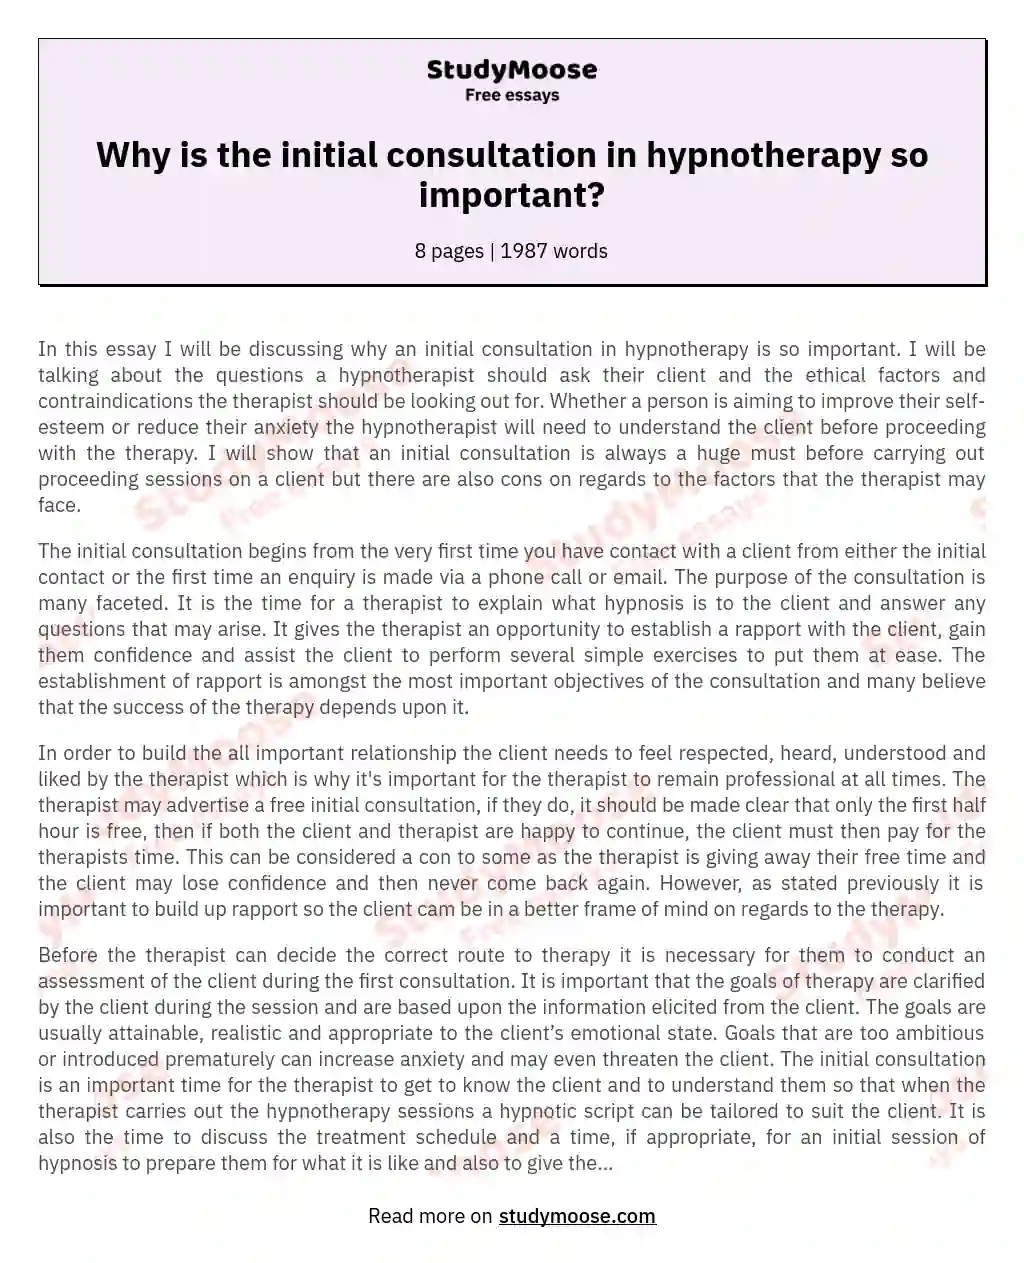 Are there any hypnotherapists in the united states?